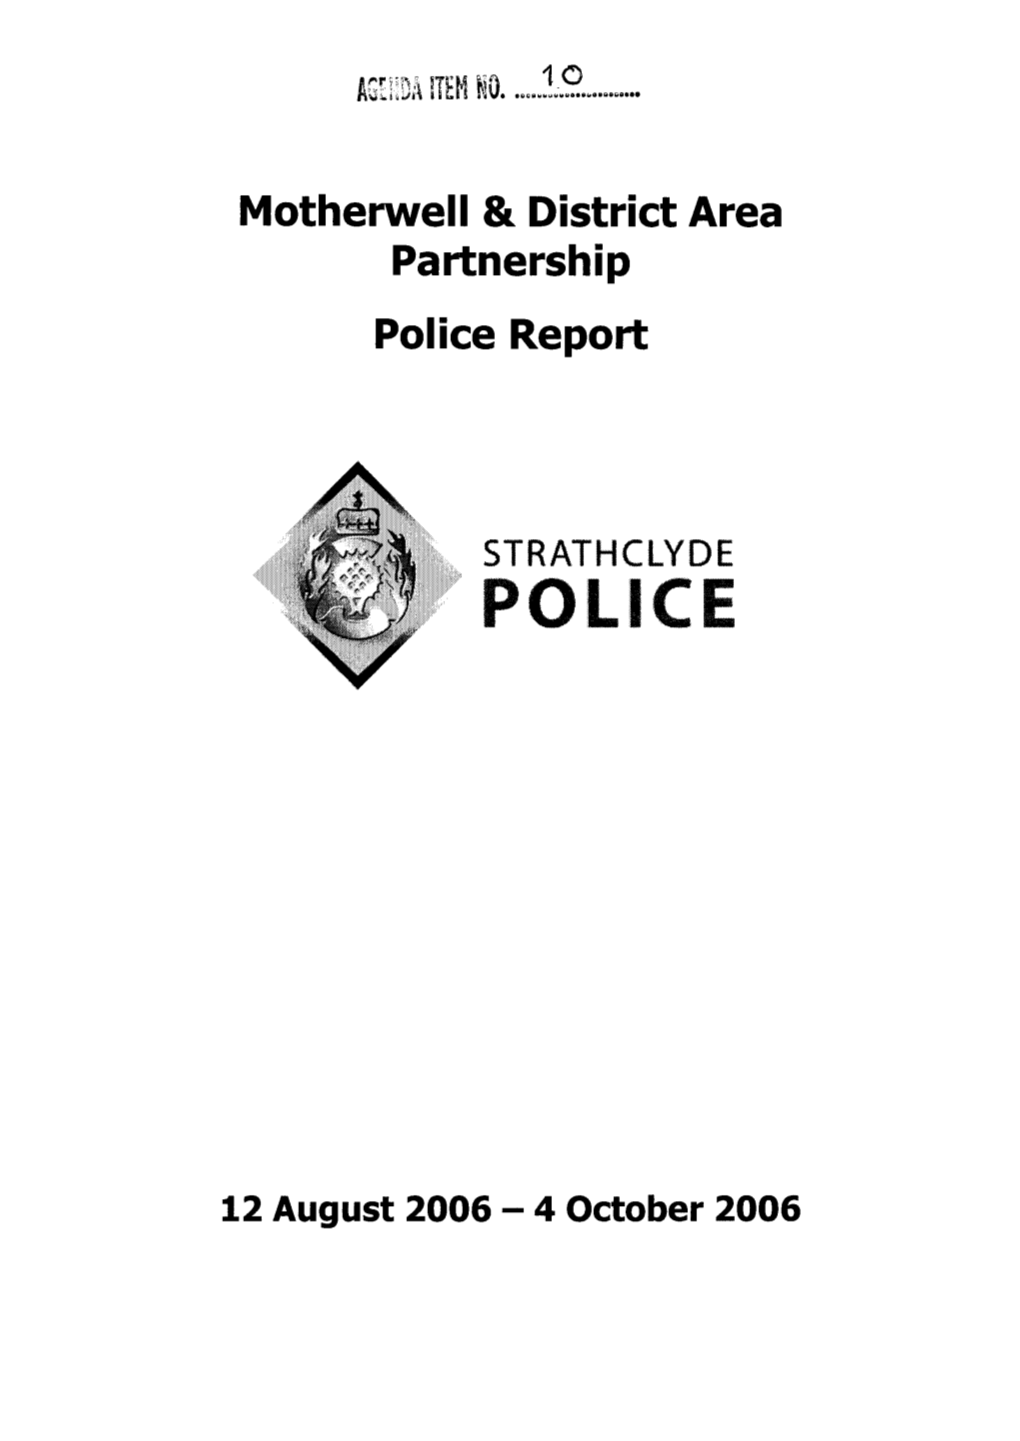 Motherwell & District Area Partnership Police Report